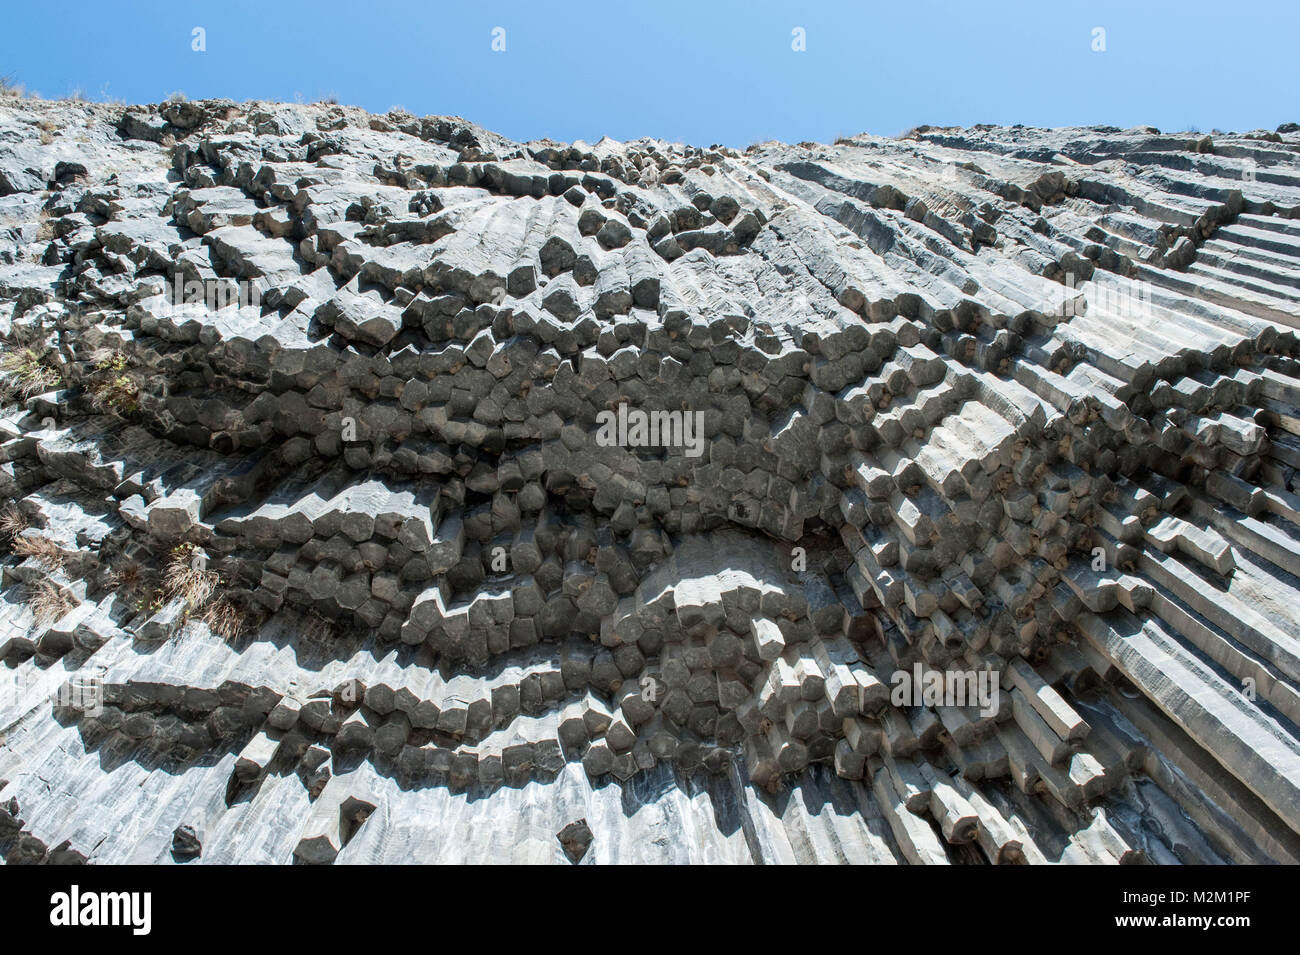 Along the sides of the Garni gorge are cliffs of basalt columns, carved out by the Goght river. Stock Photo